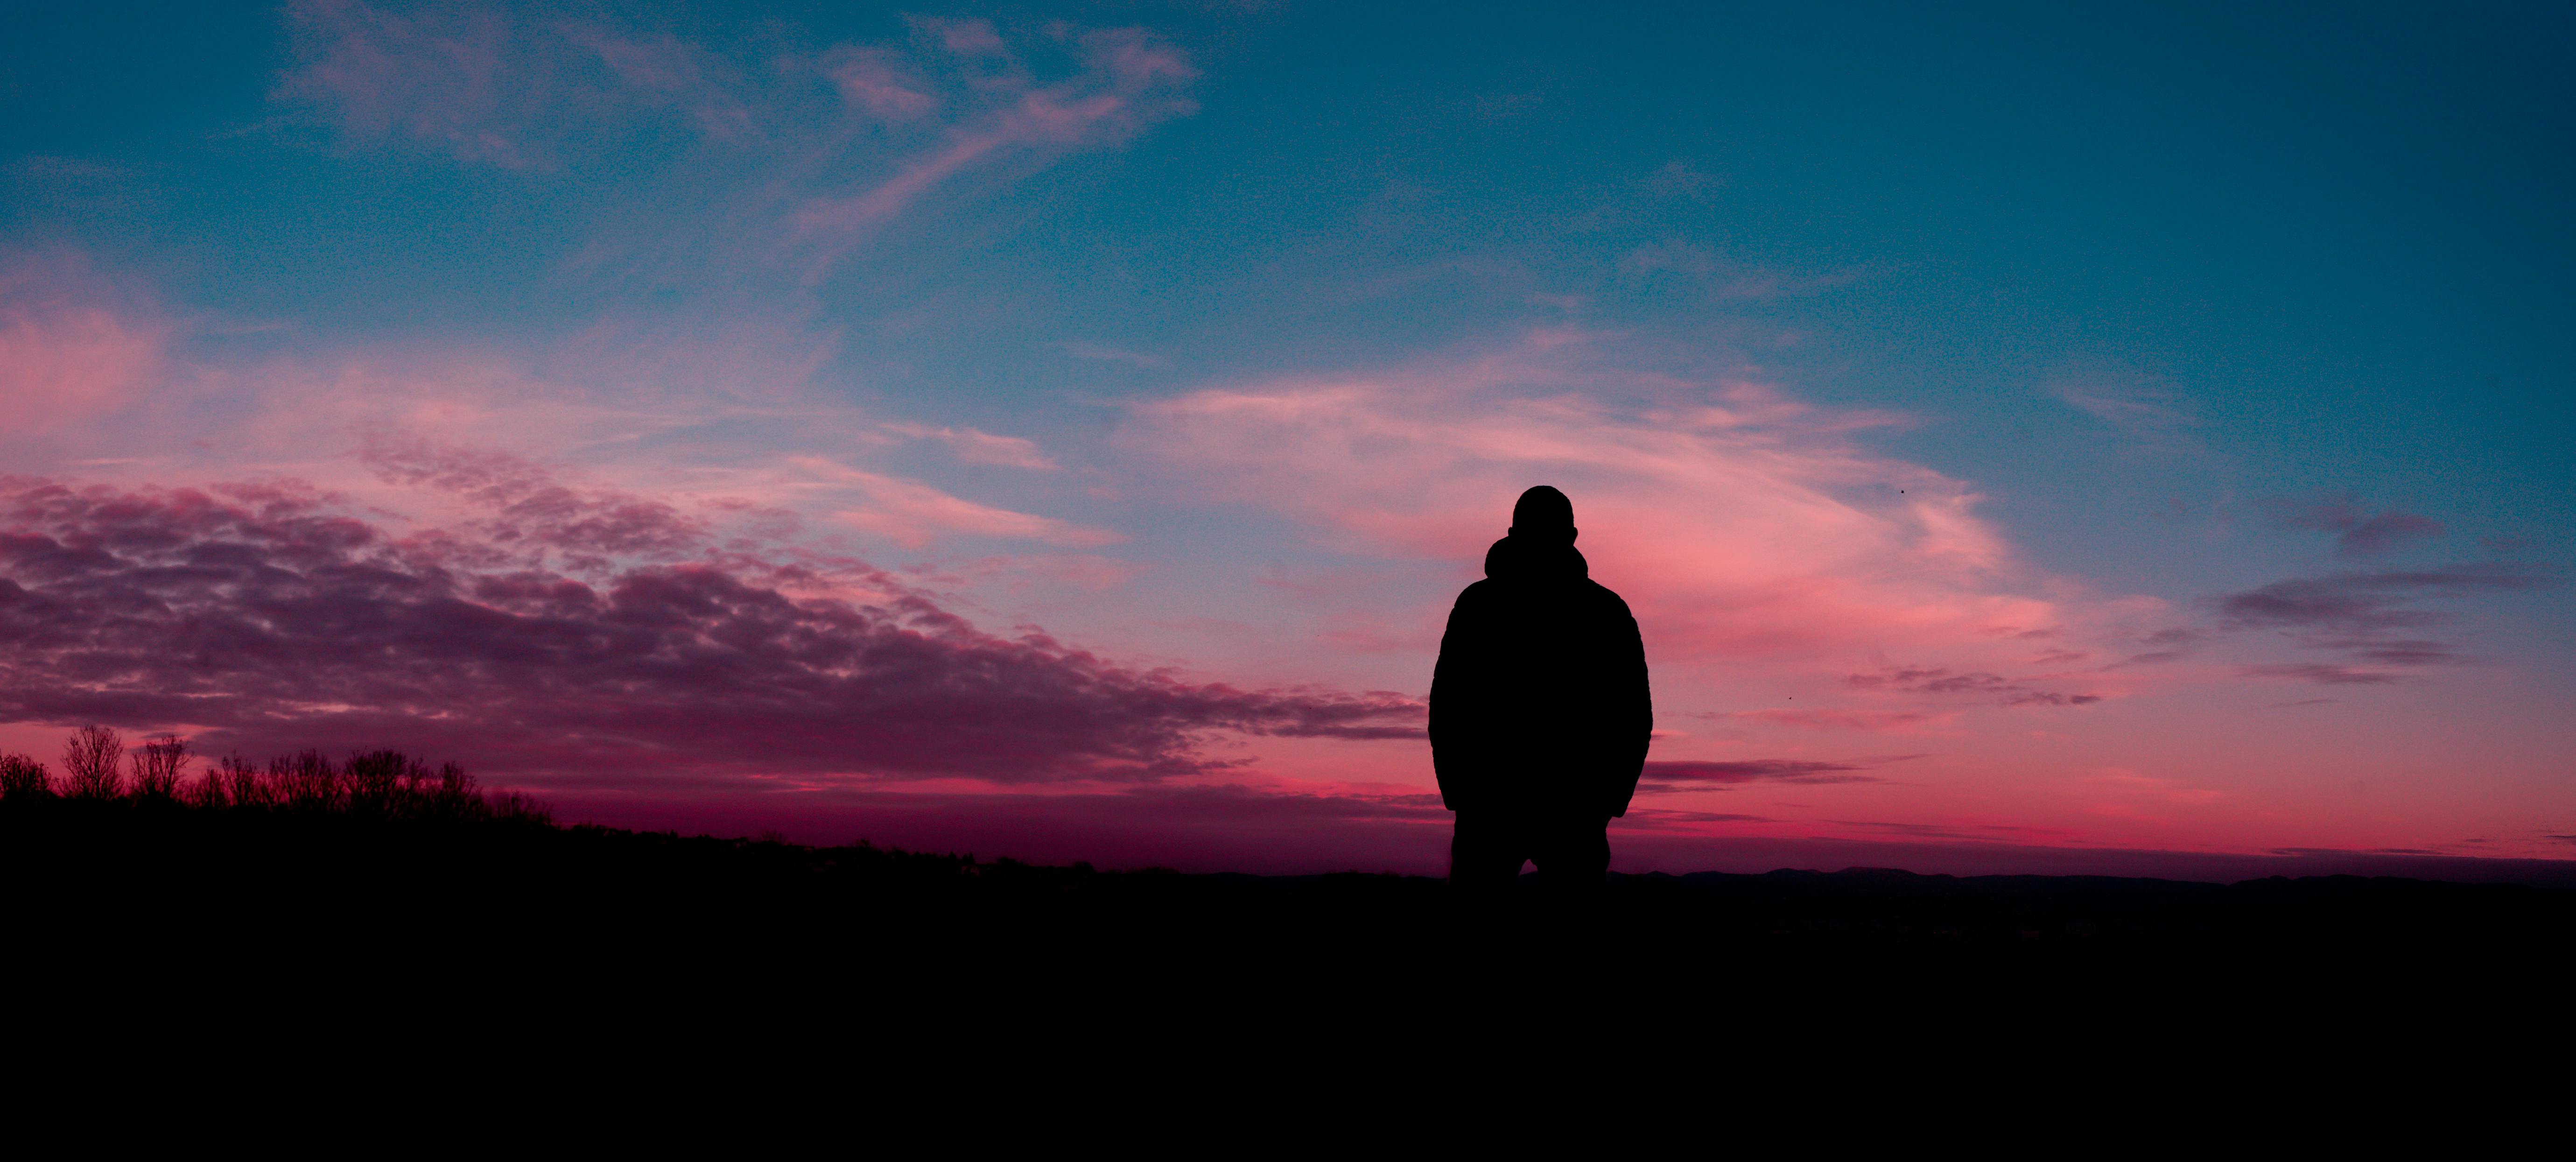 Silhouette Of Human With Sunset Background Free Stock Photo